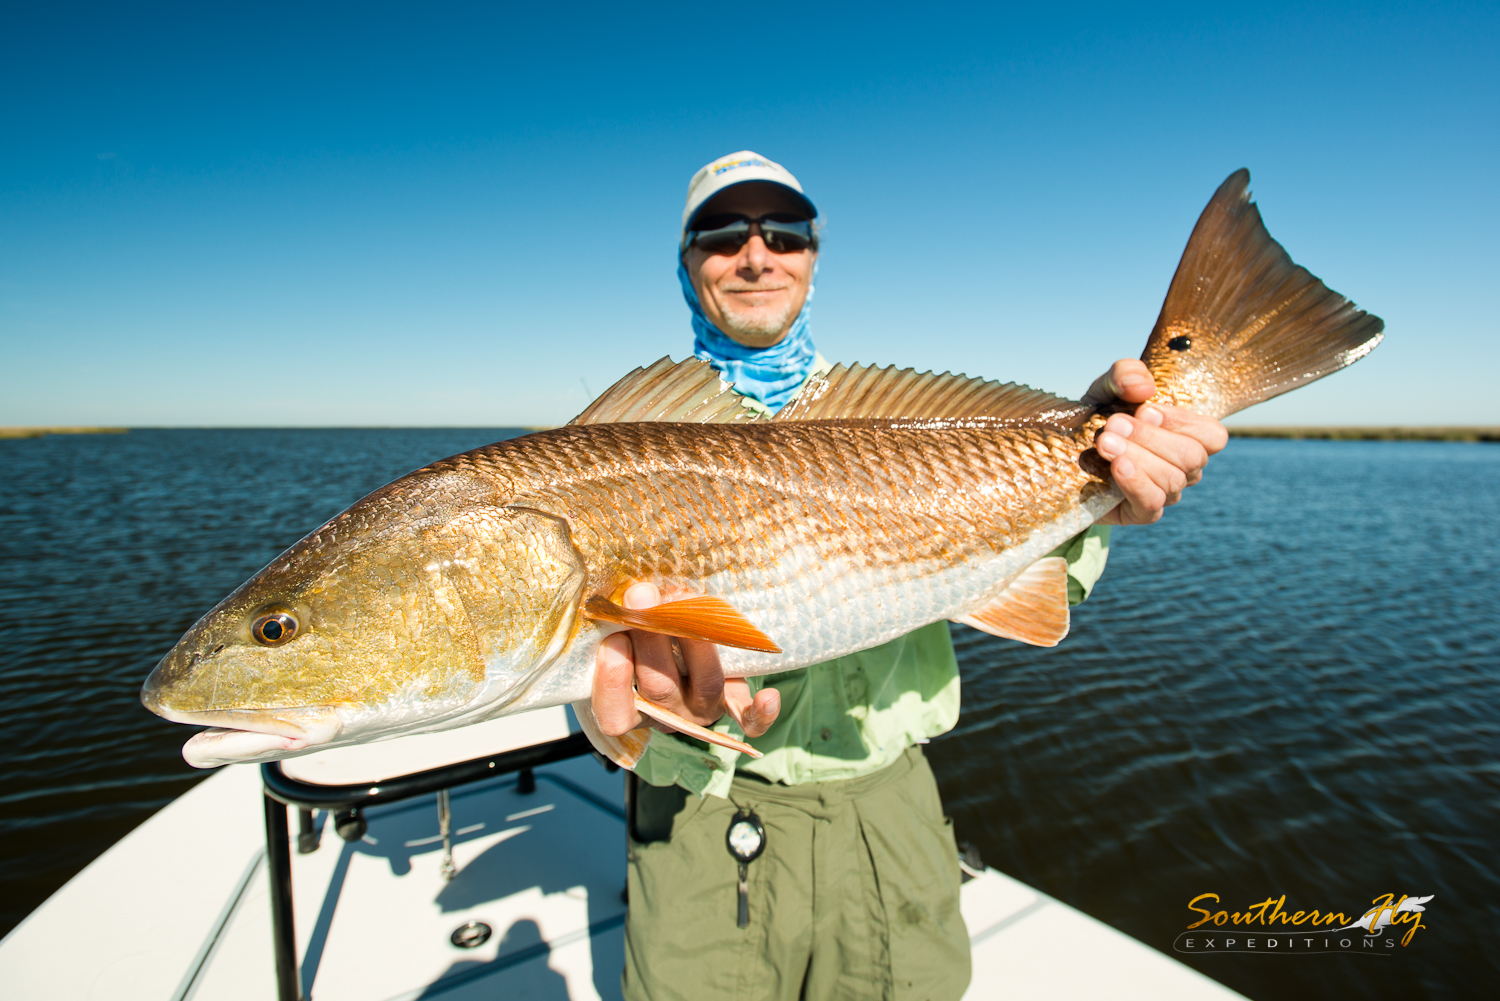 Montana Anglers Fly Fishing New Orleans - Southern Fly Expeditions LLC 